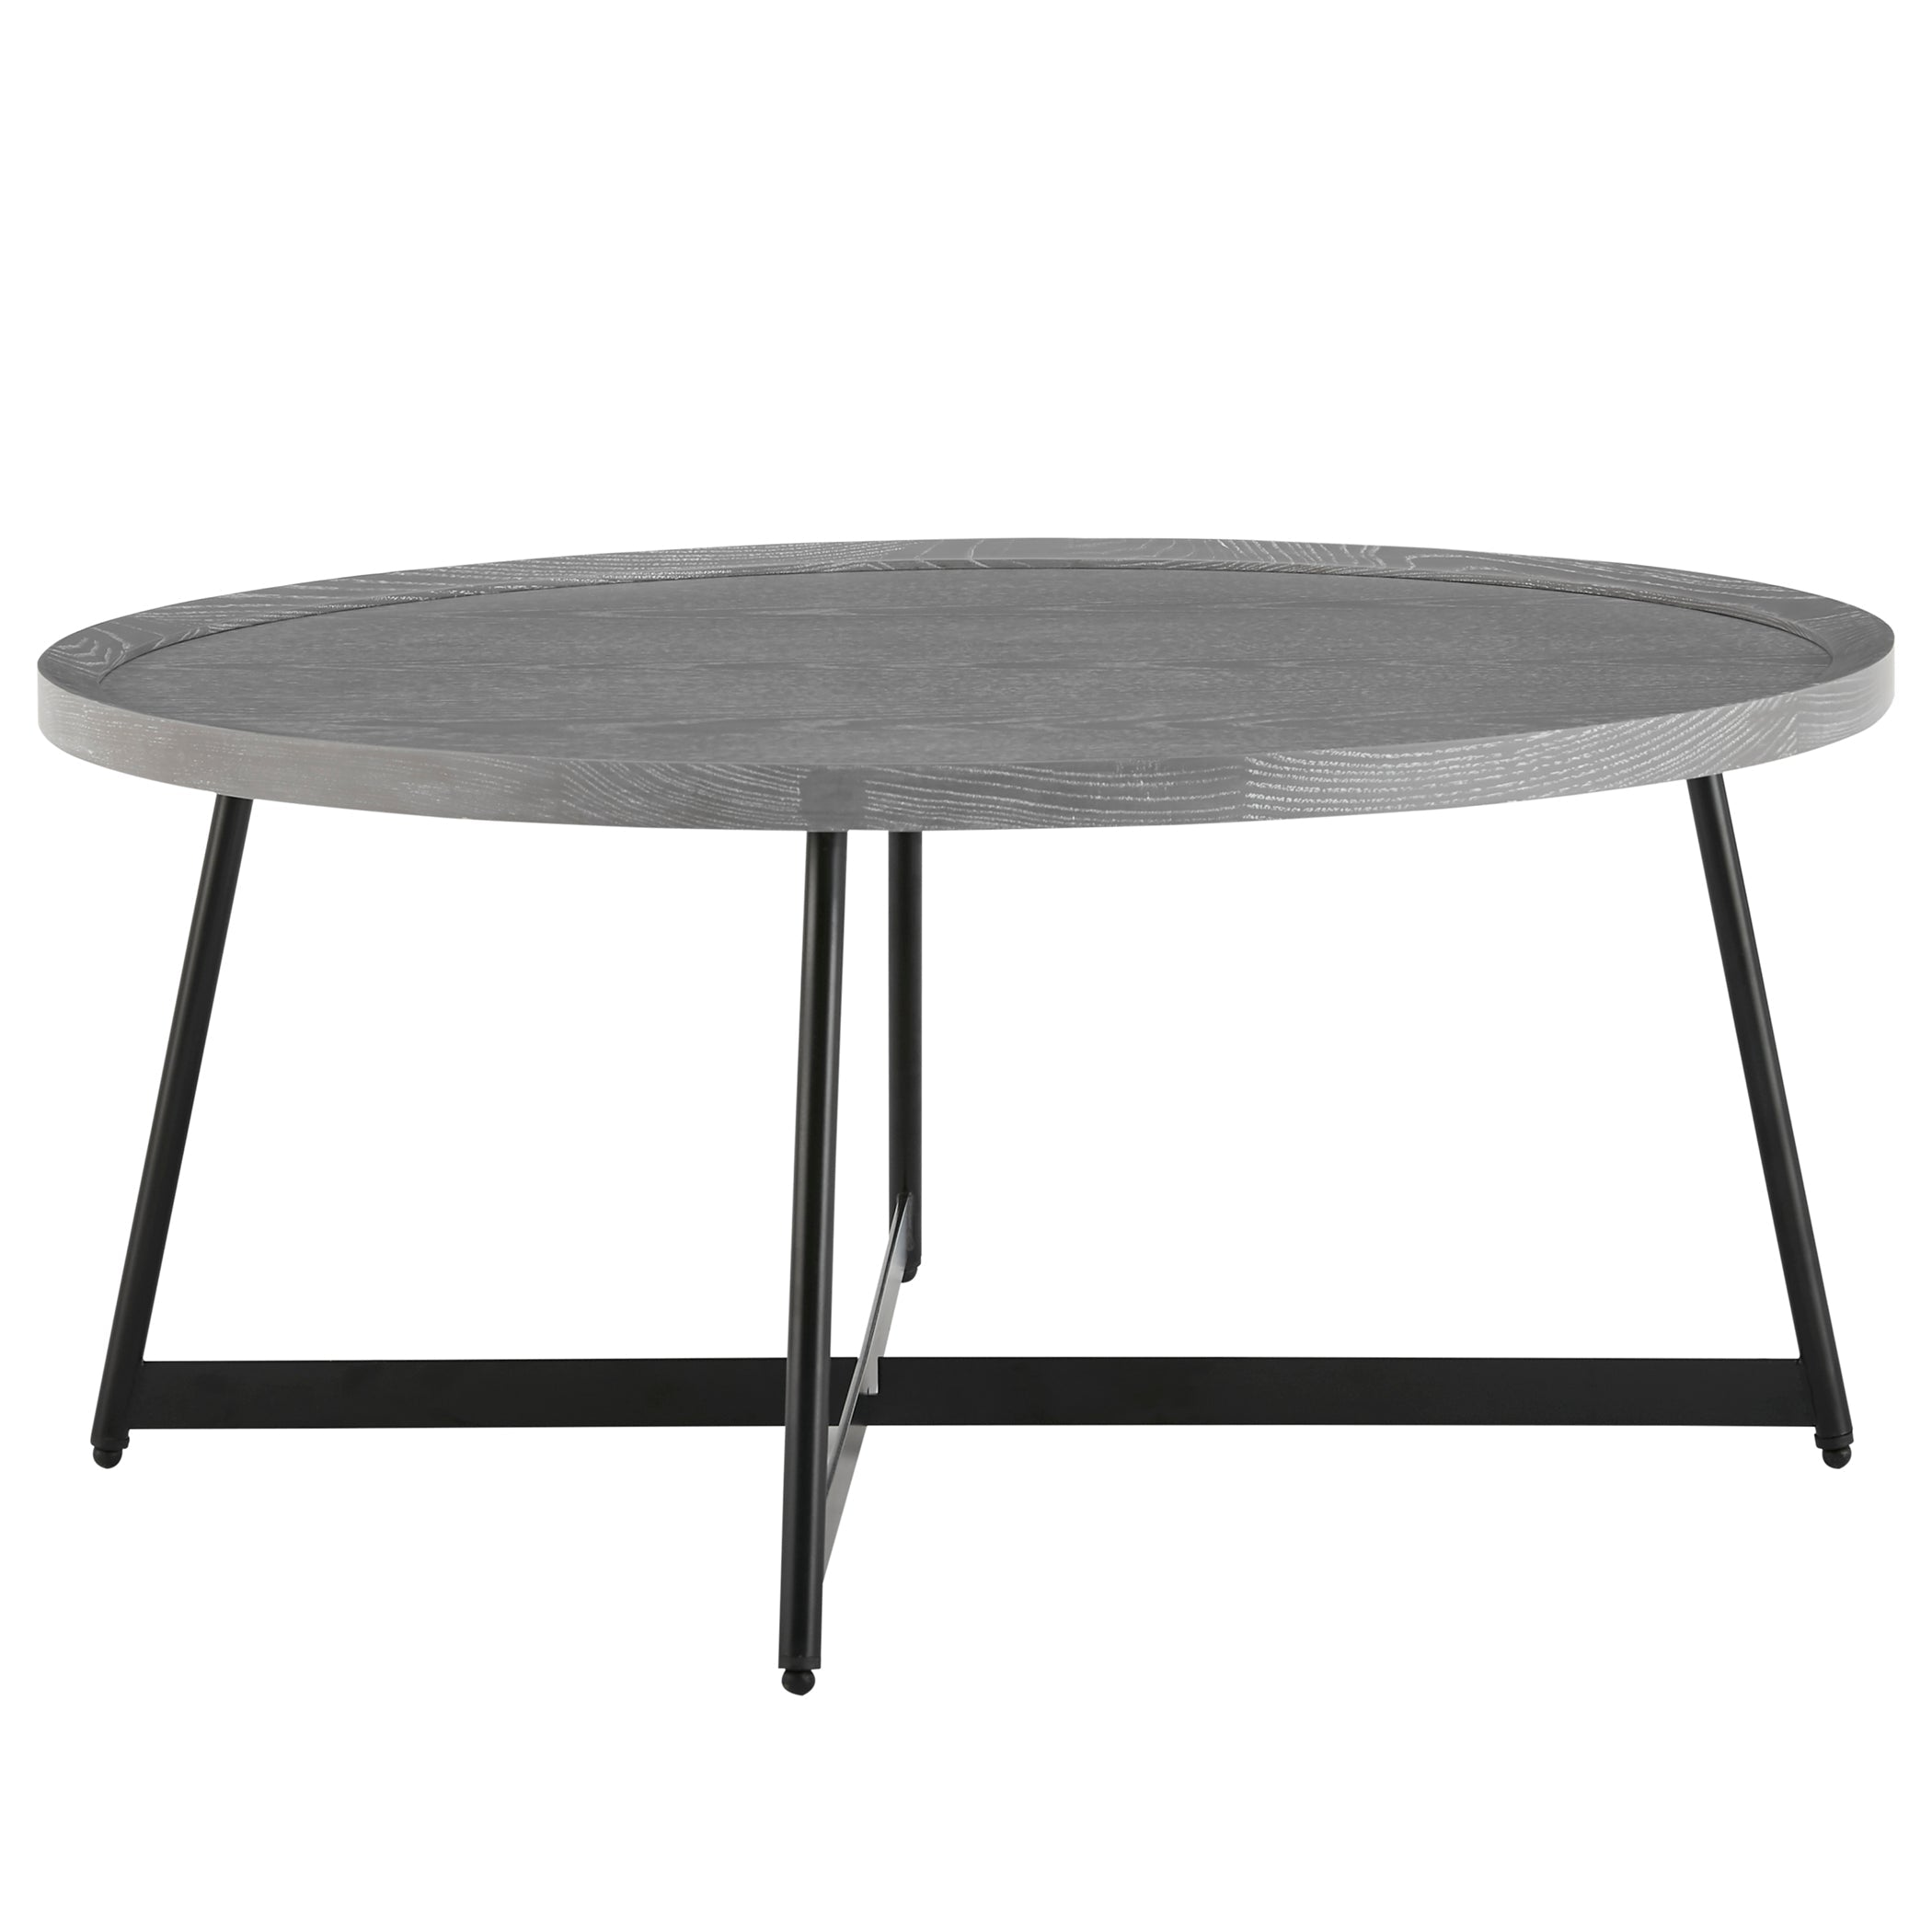 Niklaus 35" Round Coffee Table - What A Room